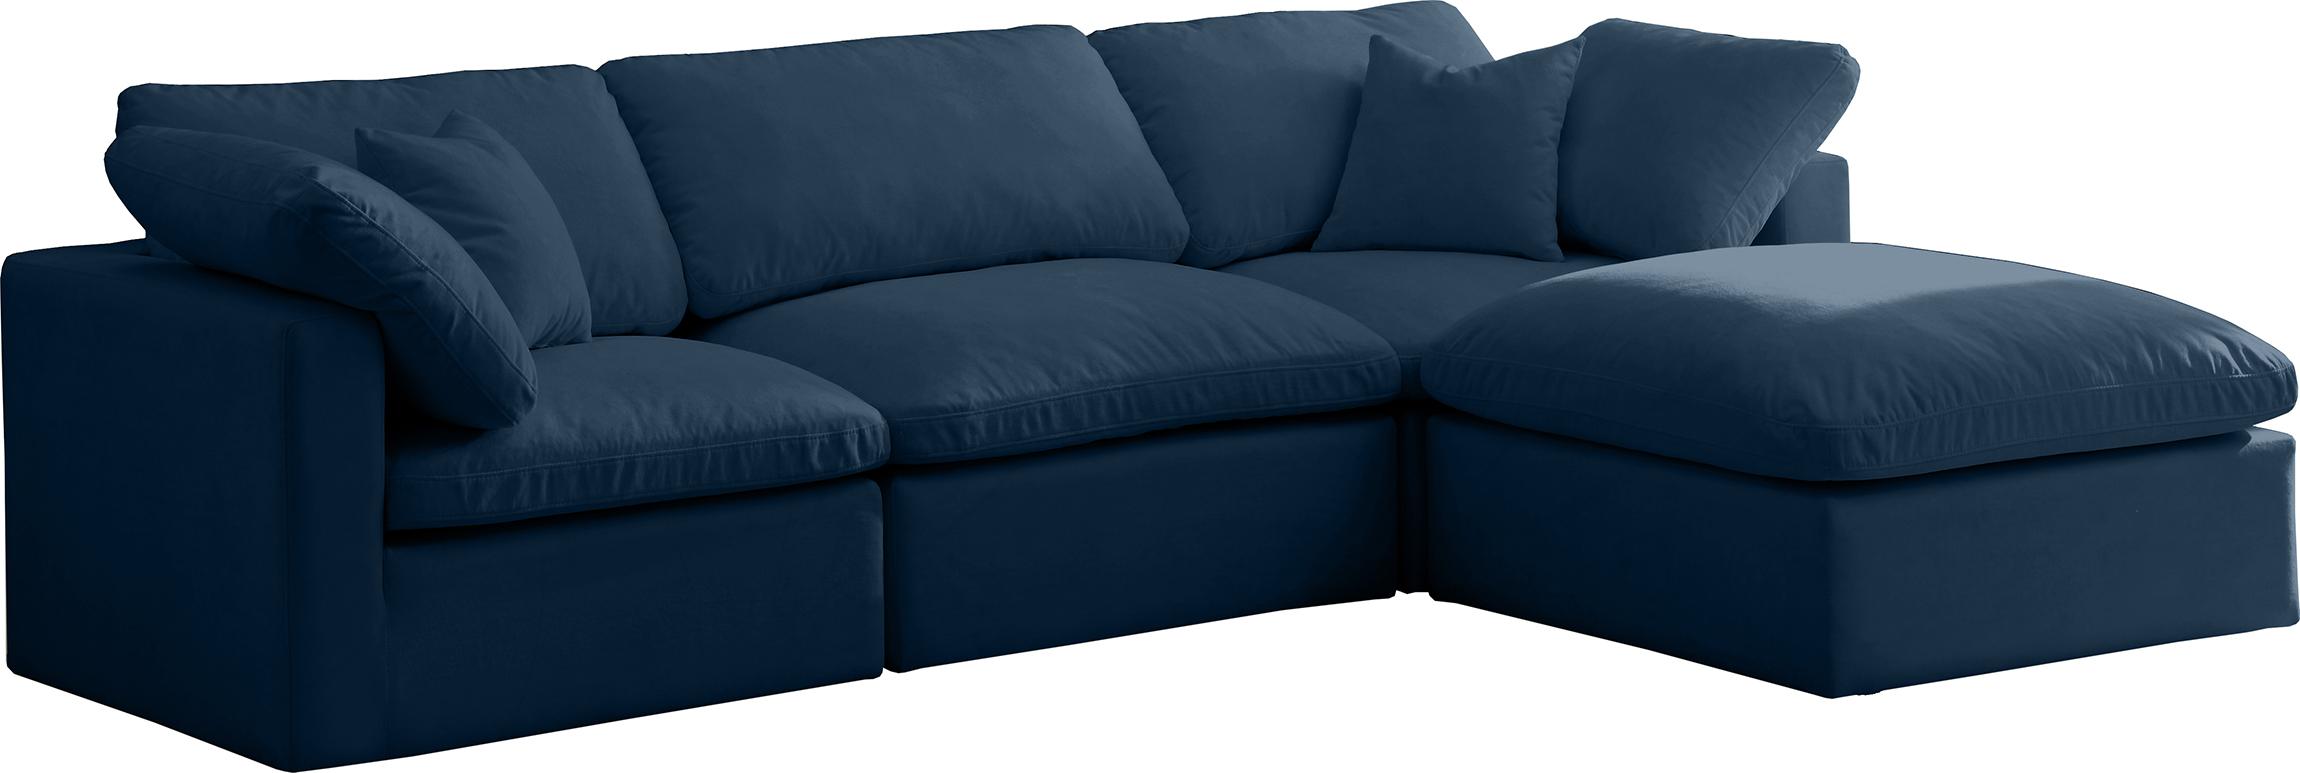 Contemporary, Modern Sectional Sofa 602Navy-Sec4A 602Navy-Sec4A in Navy Fabric